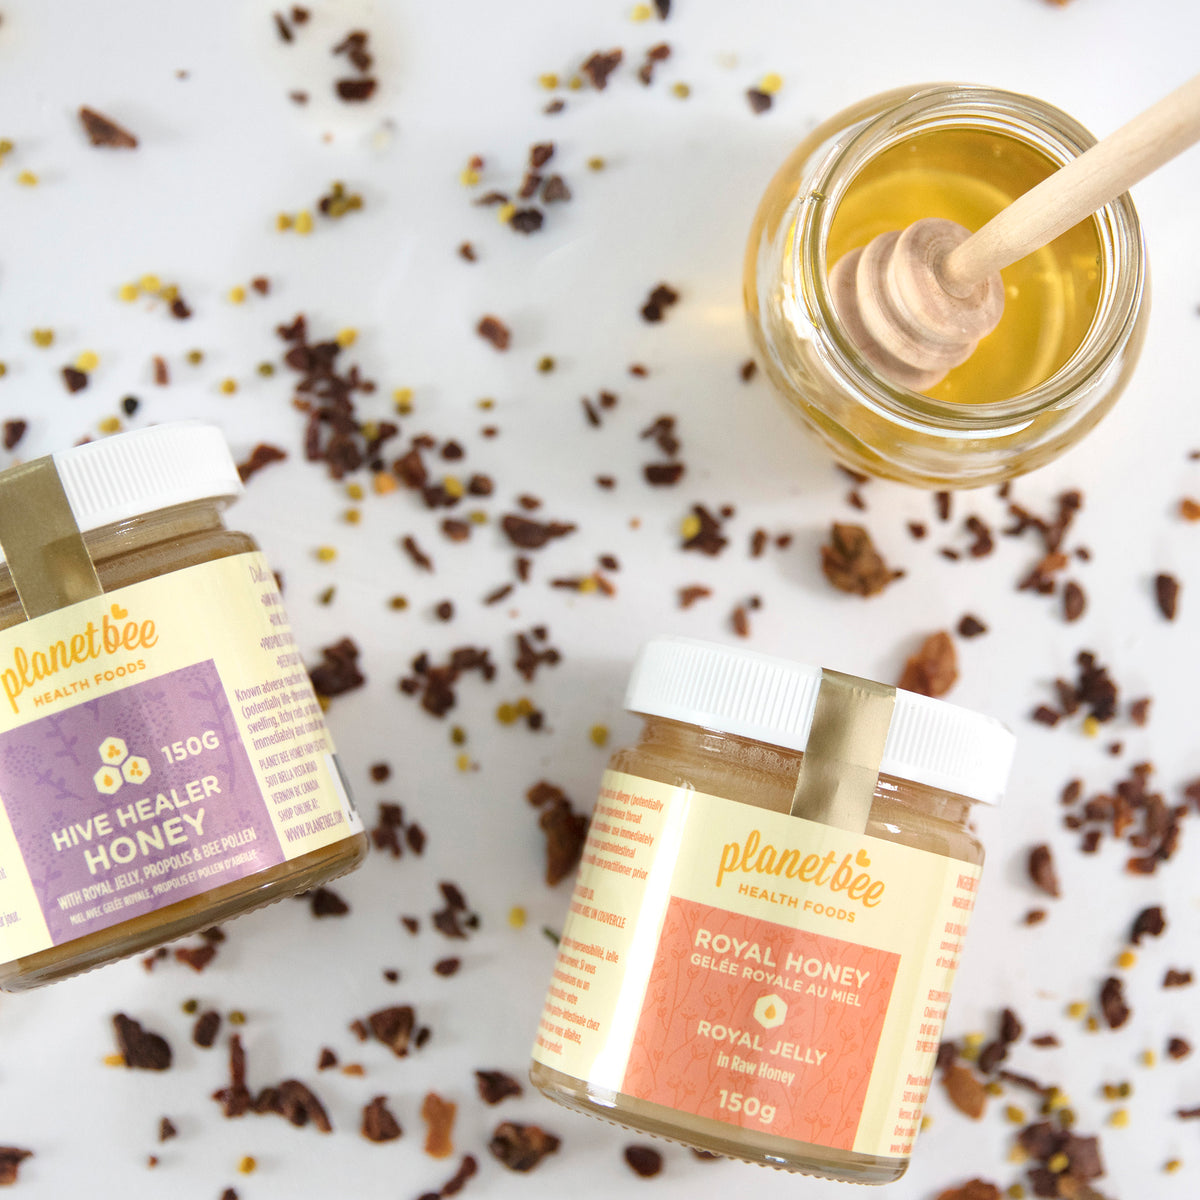 Royal Honey and Hive Healer Honey with Pollen Propolis Royal jelly